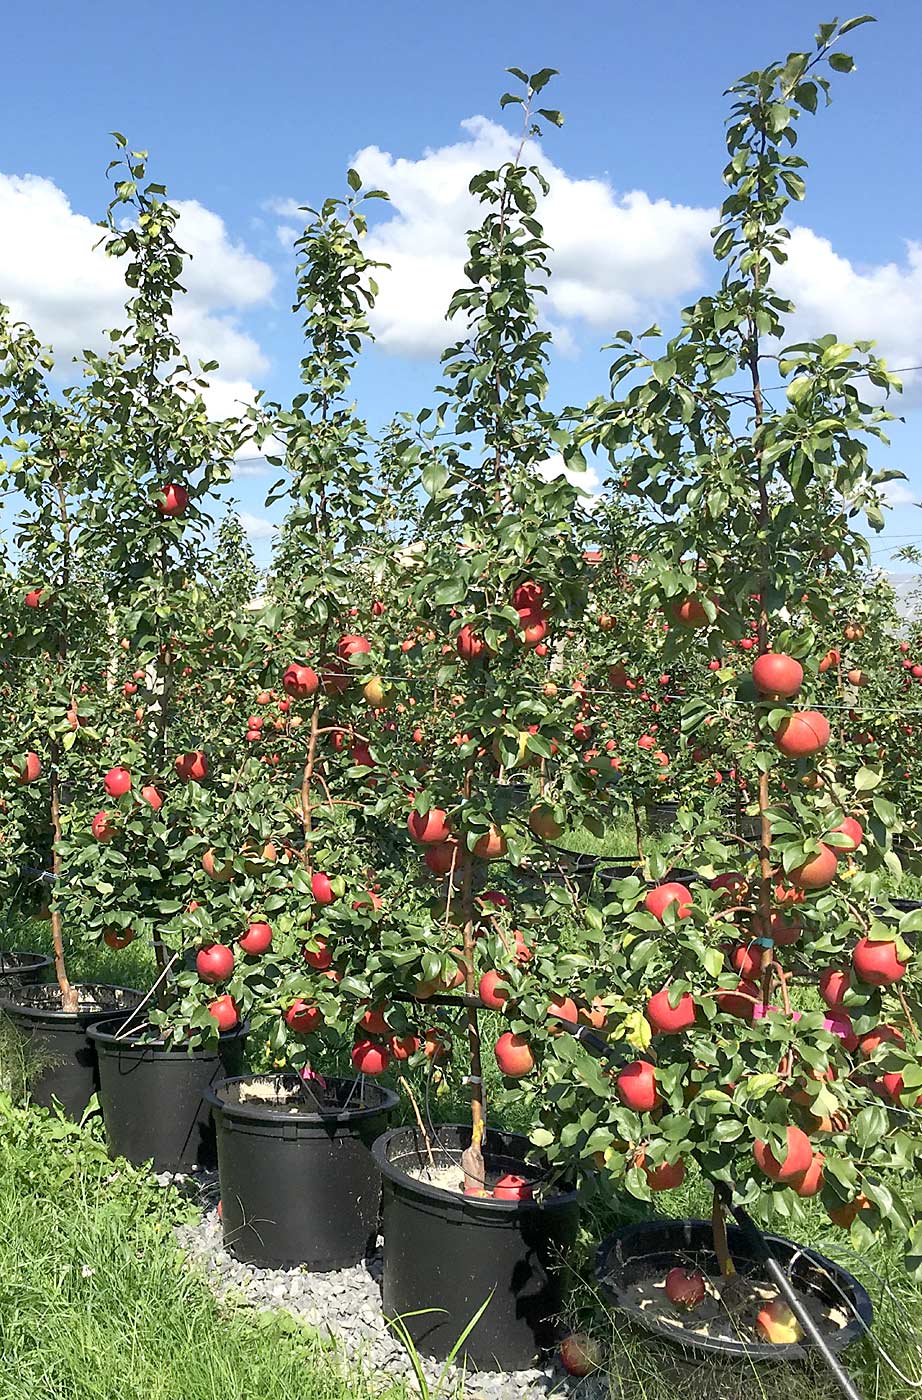 In 2018, the second-leaf Honeycrisp produced their first crop, which was analyzed for nutrient content to see which rootstocks can provide more nutrients to the fruit. (Courtesy Lailiang Cheng)